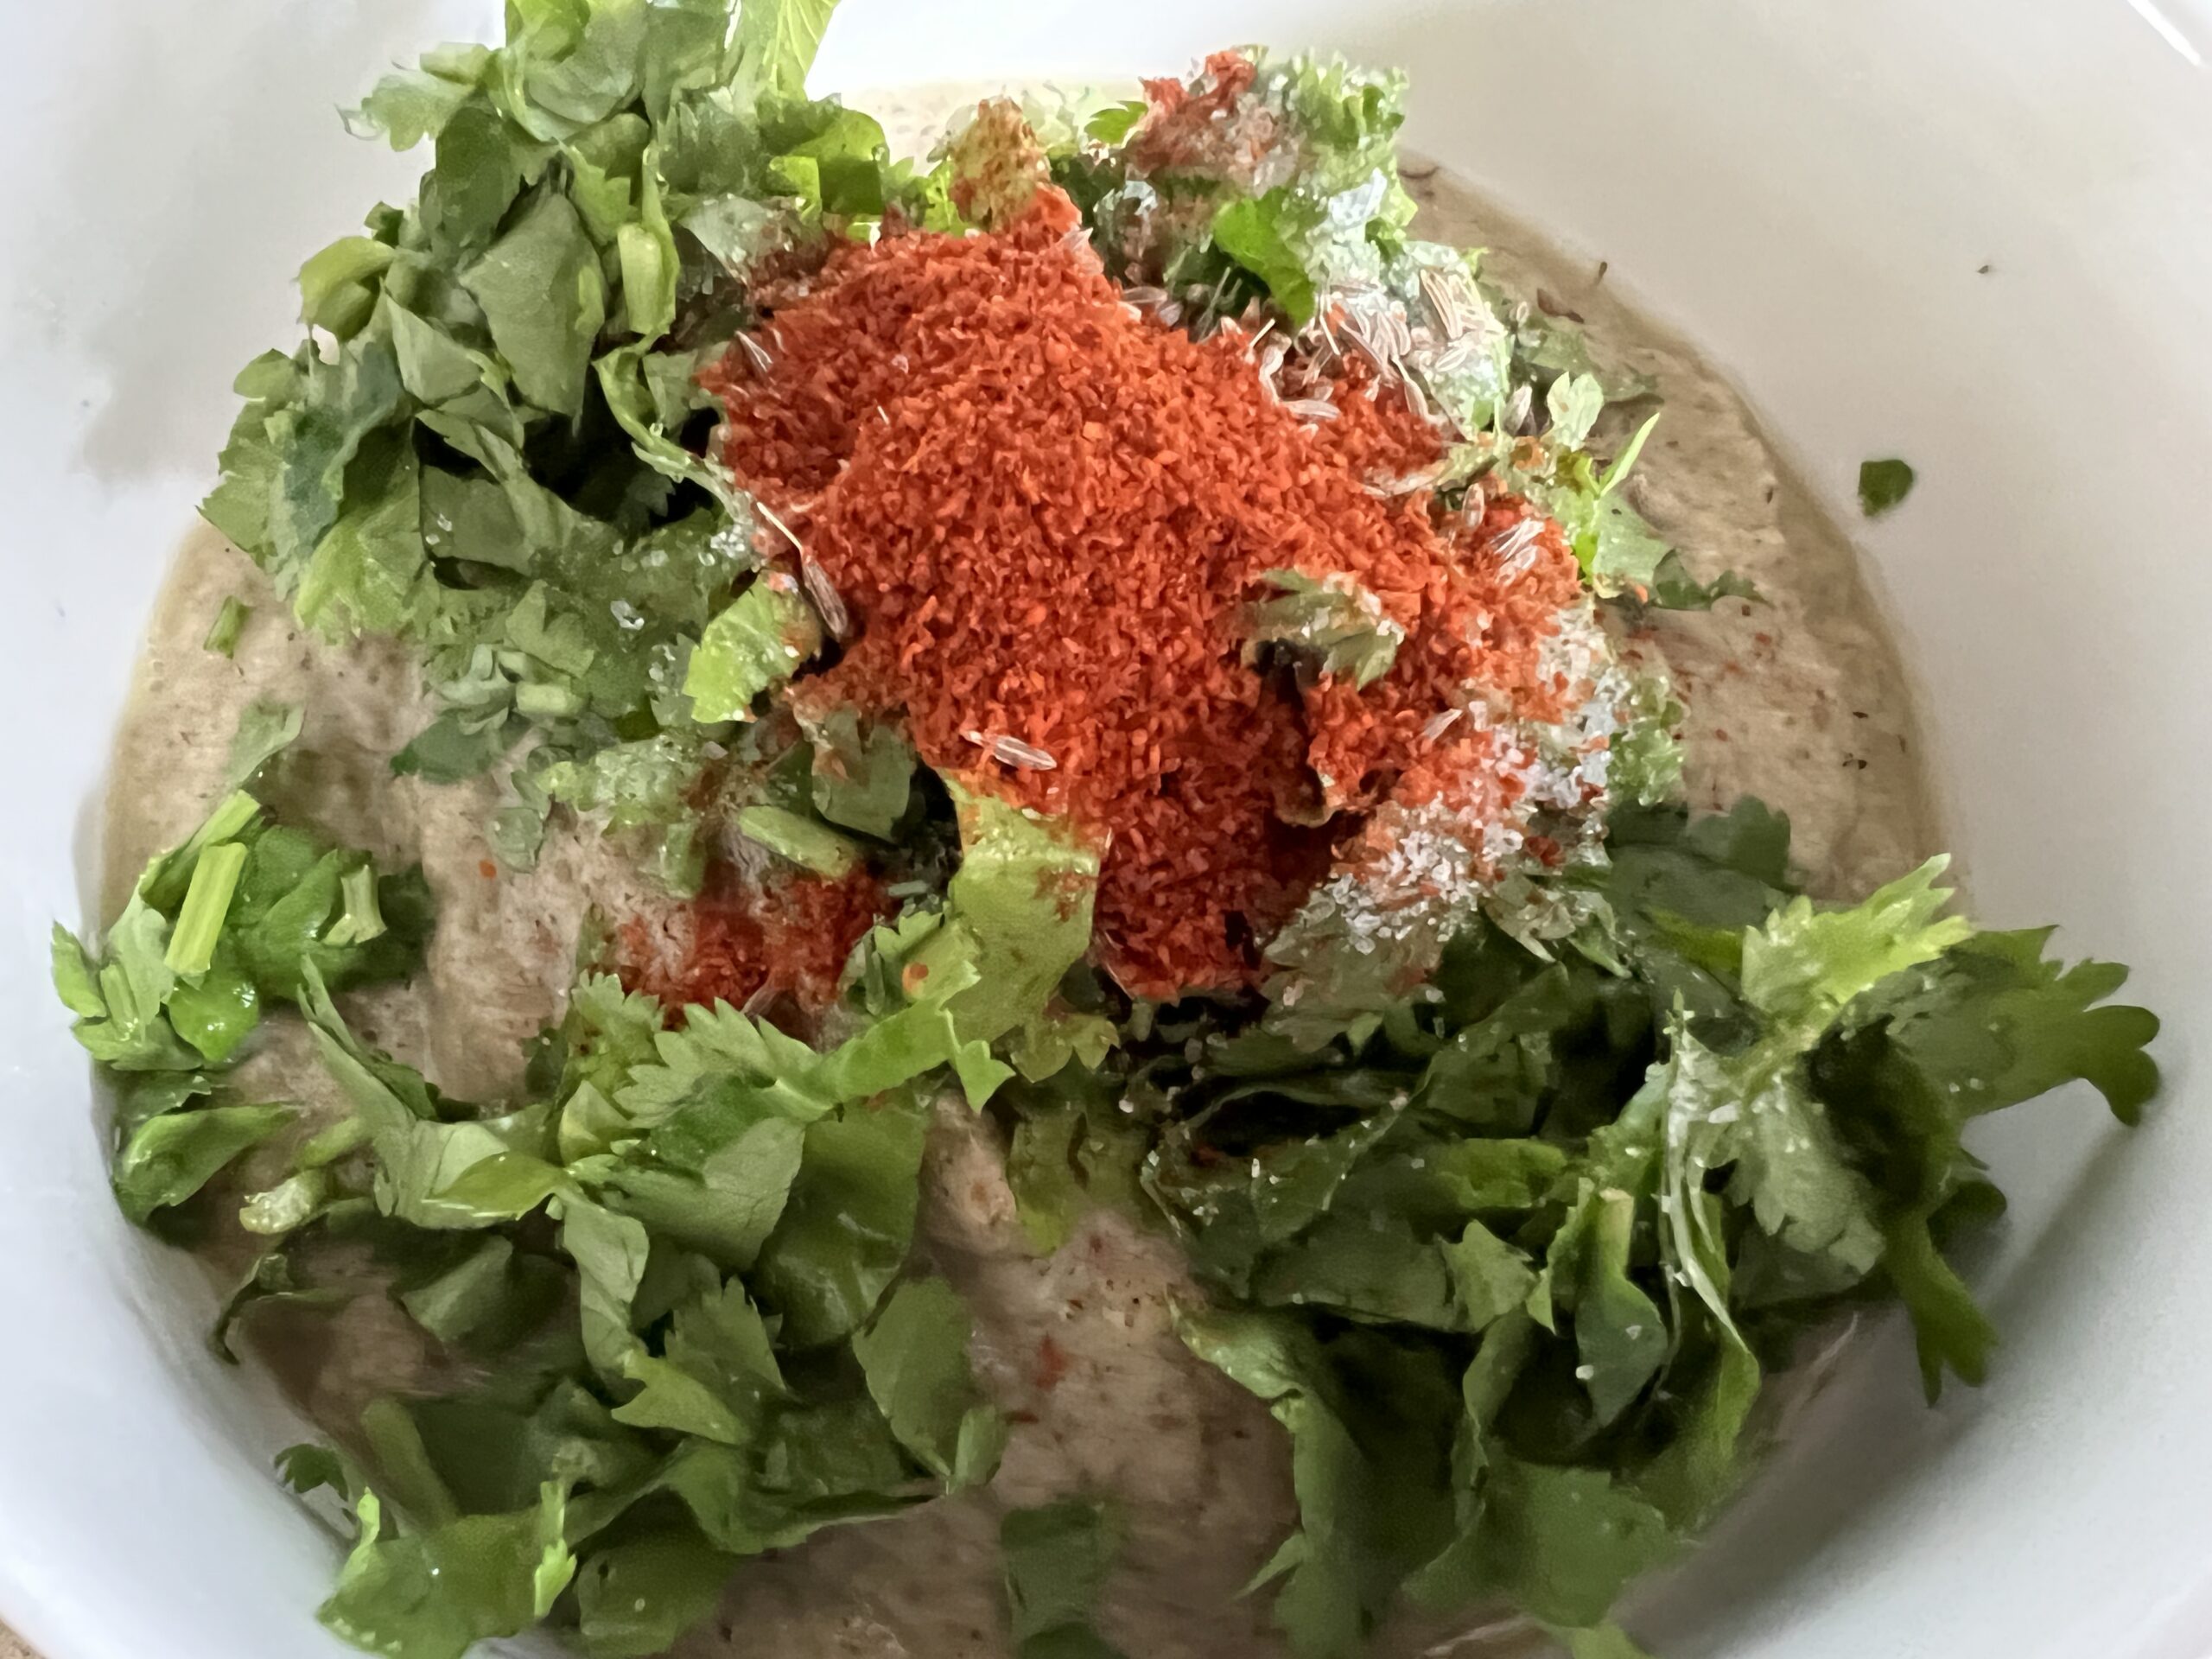 Sprouted Beans and Lentils Chilla Recipe